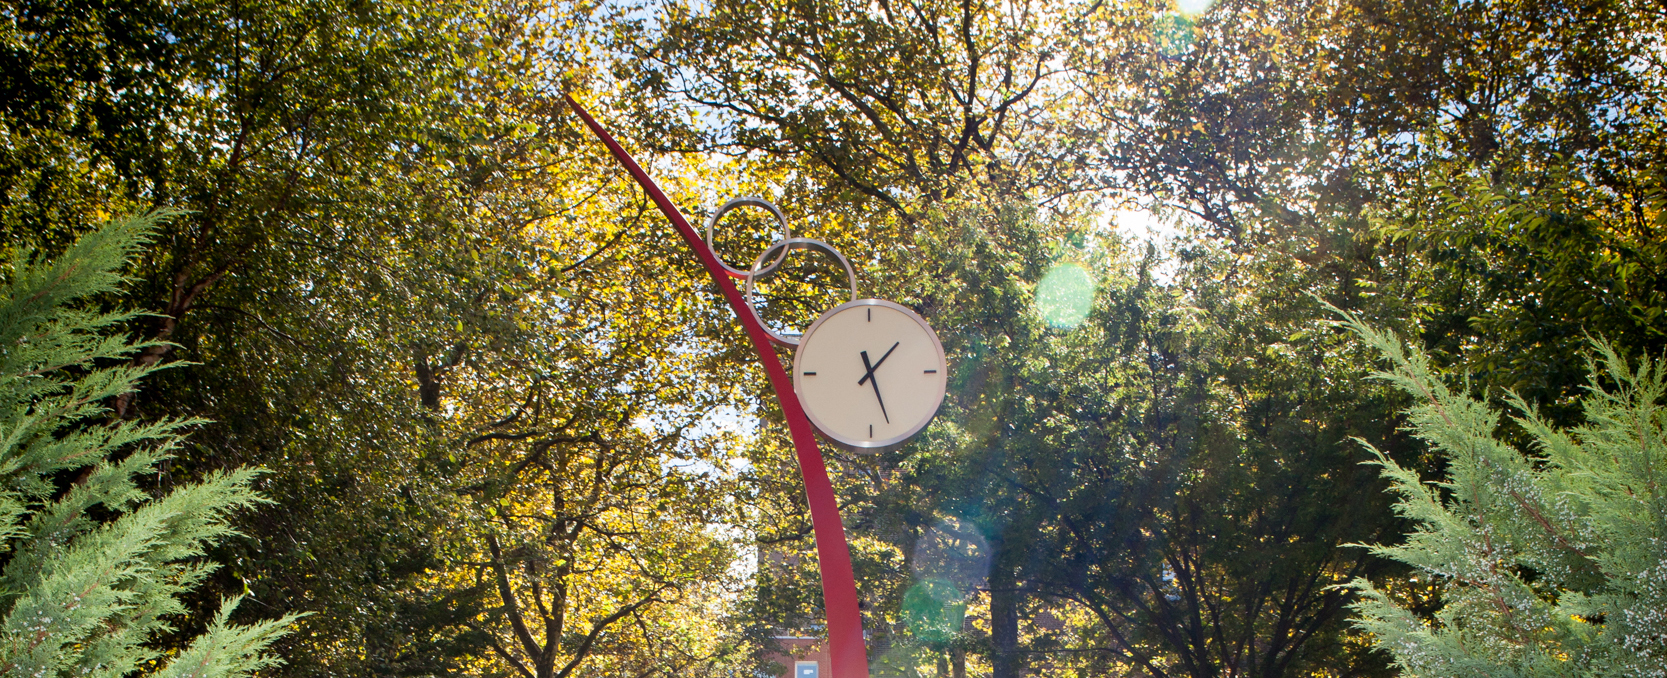 Image of metal sculpture forming a clock taken from a really low angle and showing a forest canopy above.